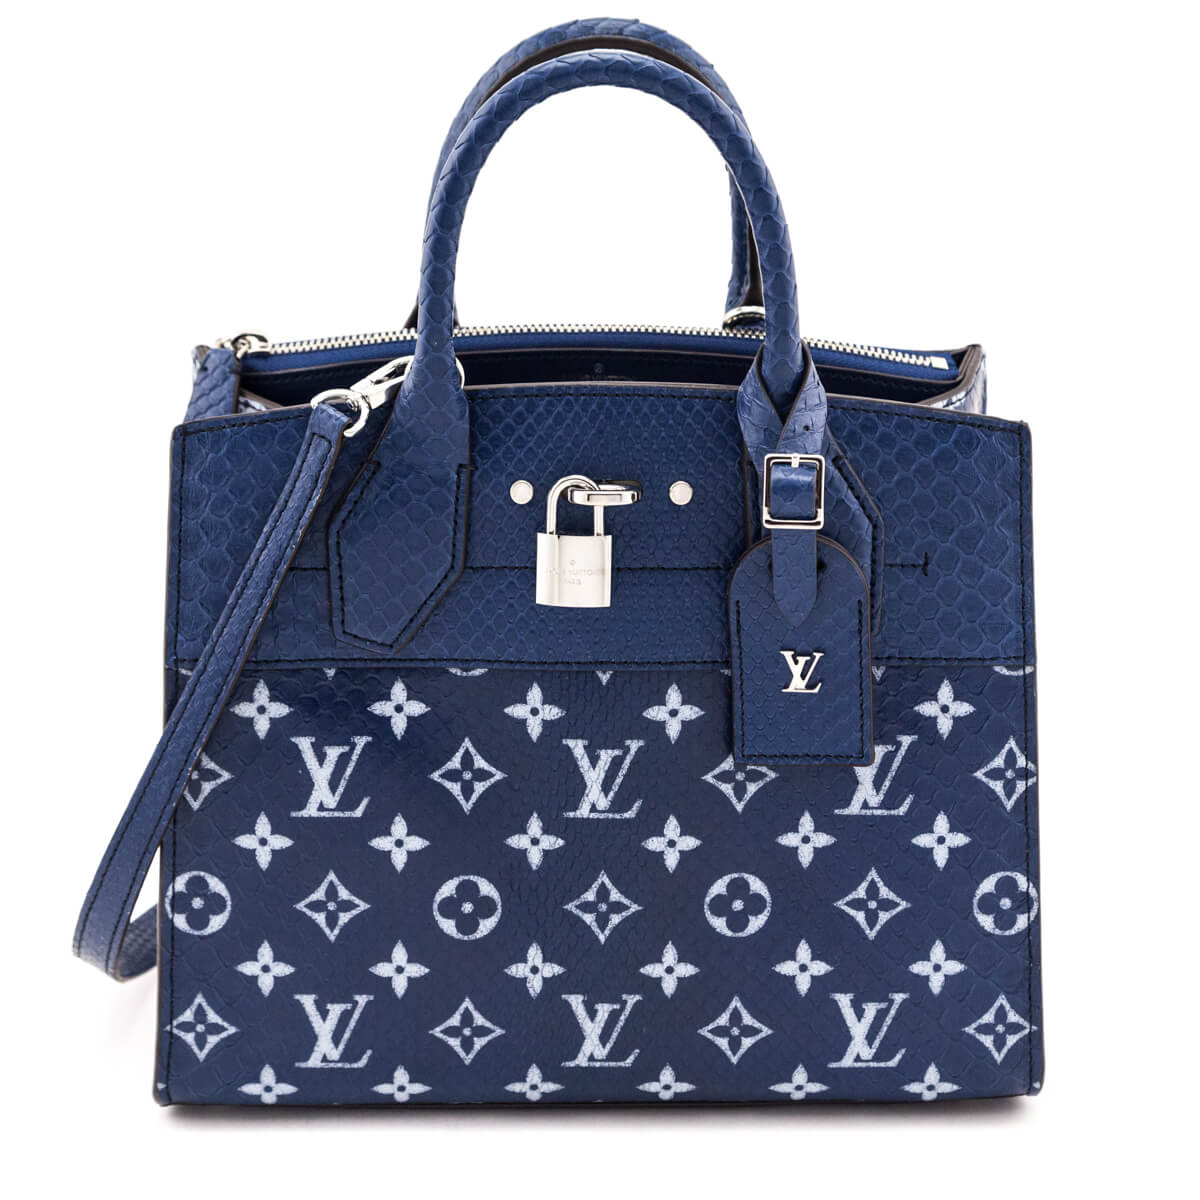 Shop authentic preloved Louis Vuitton bags for less in Canada